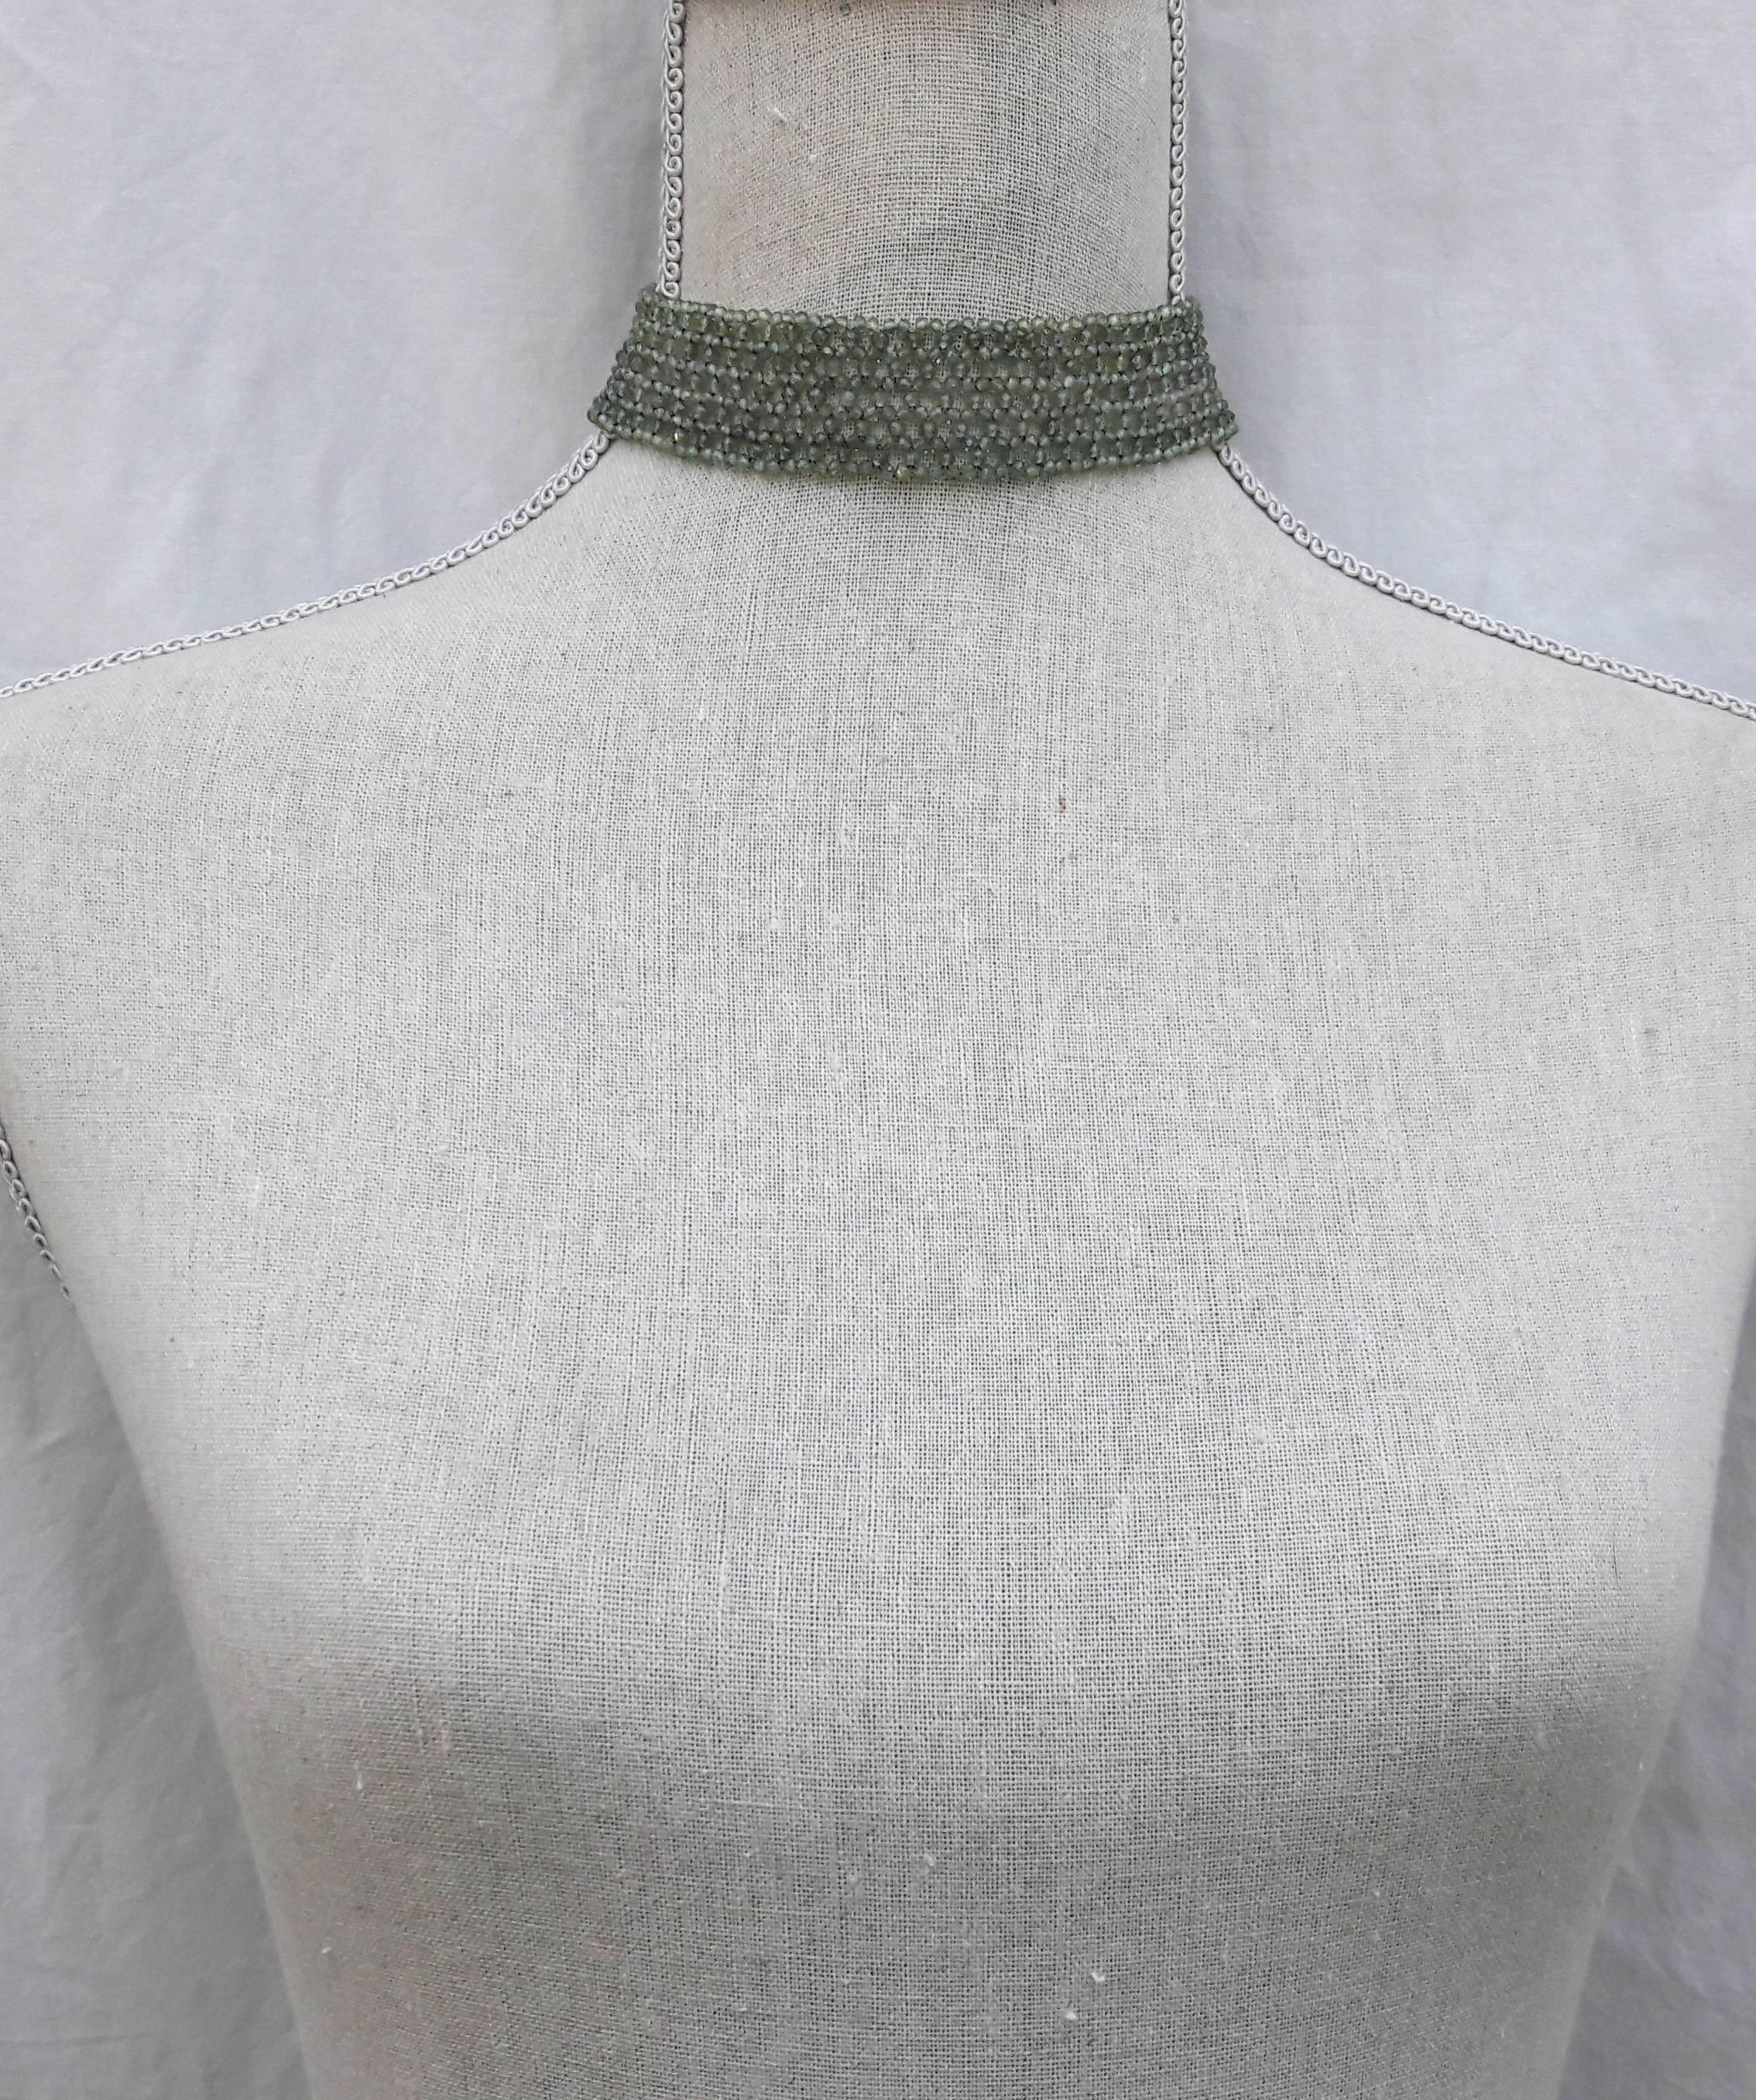 The faceted woven green onyx beaded choker was made by Marina J with tapered design and yellow gold plated silver clasp. The translucent green color of the onyx looks ethereal and lays lightly on the skin. This delicate choker has a gold plated